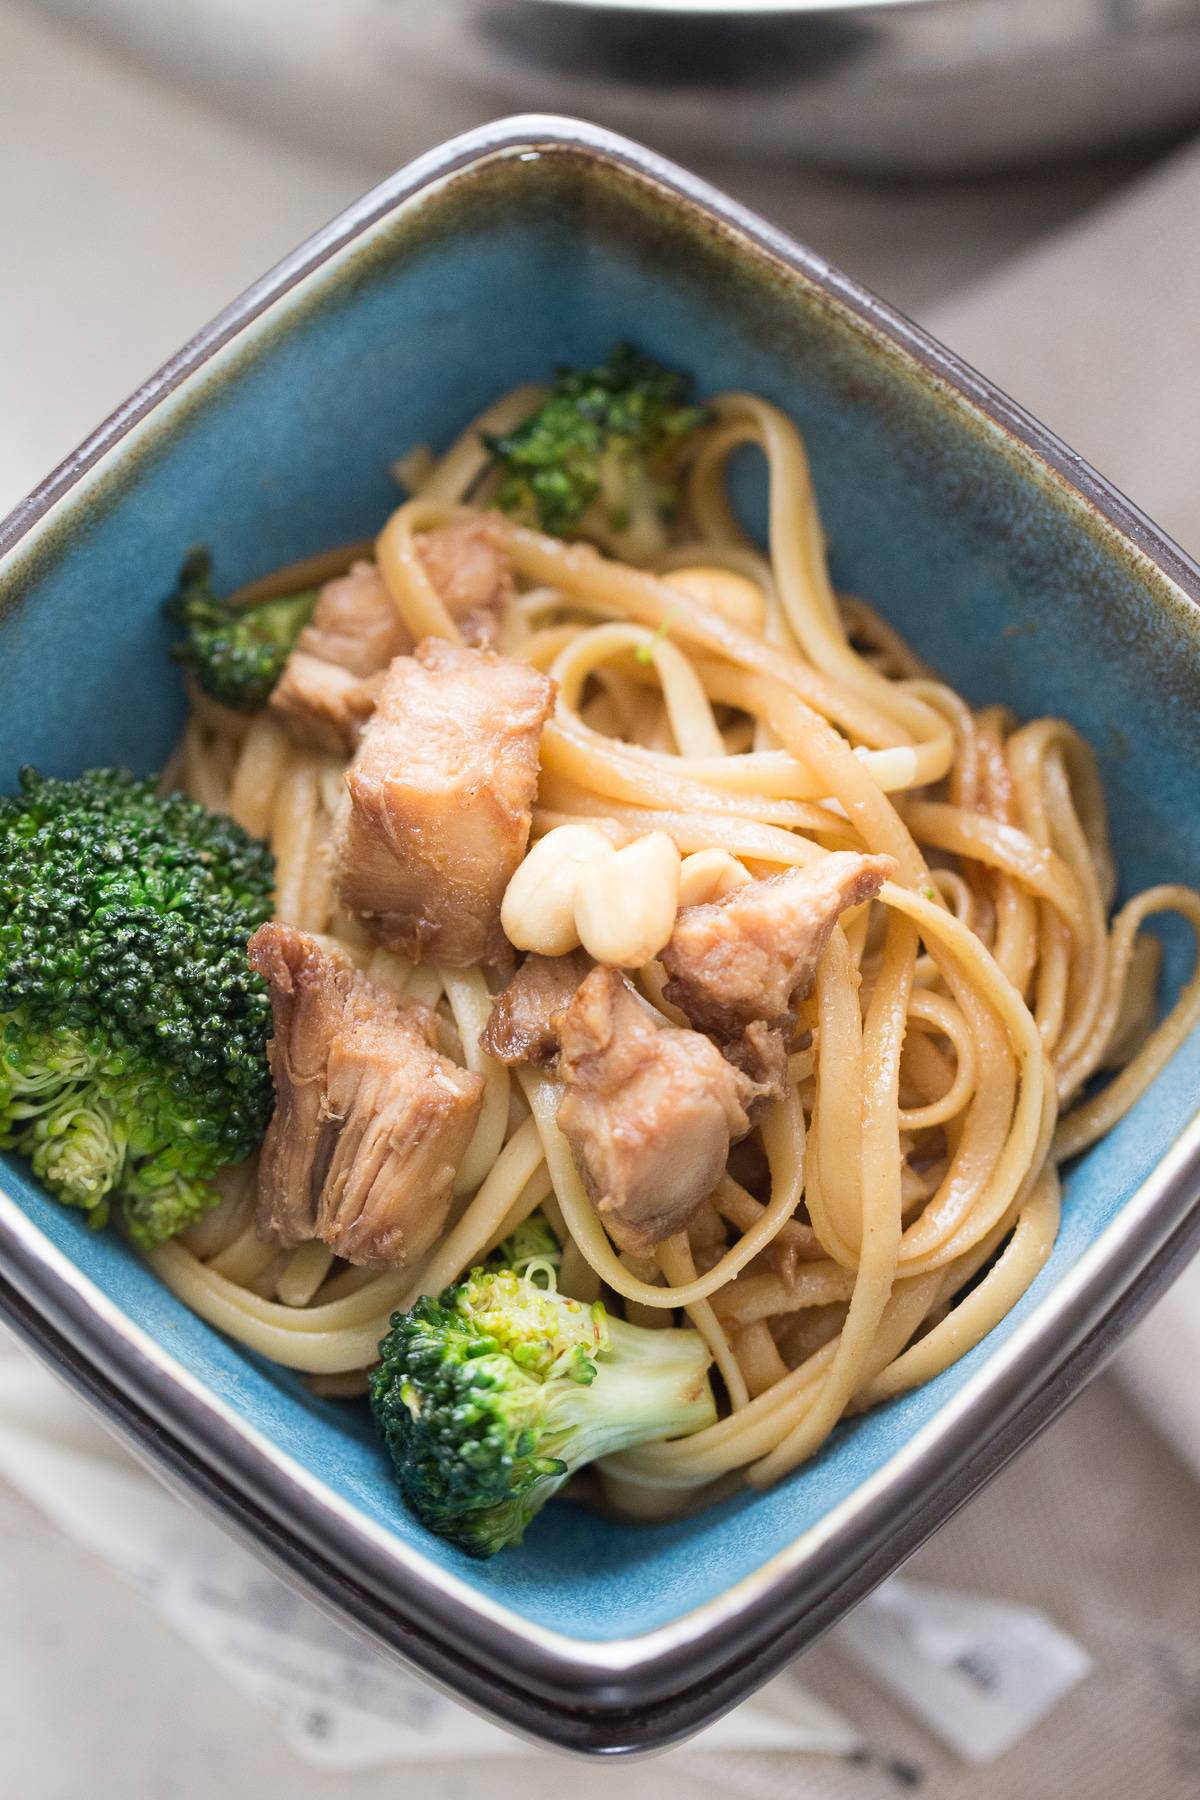 This chicken and broccoli stir fry recipe is an easy weeknight meal that everyone will love!